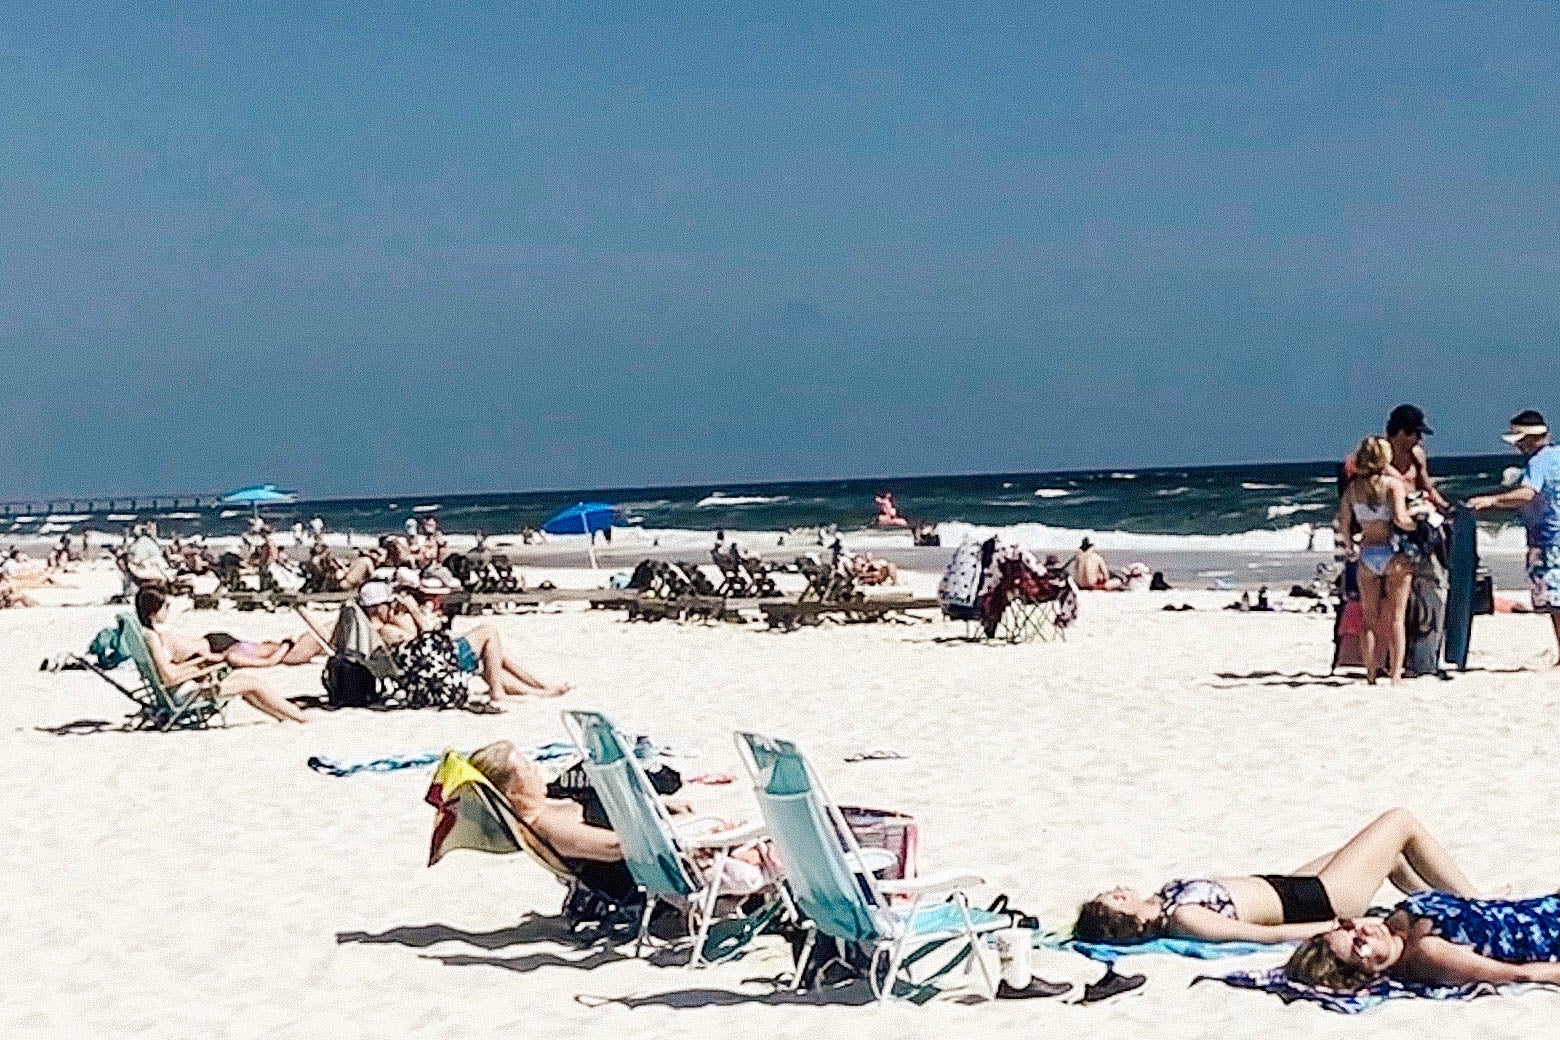 People lounging on beach chairs and towels on a sunny day at the beach